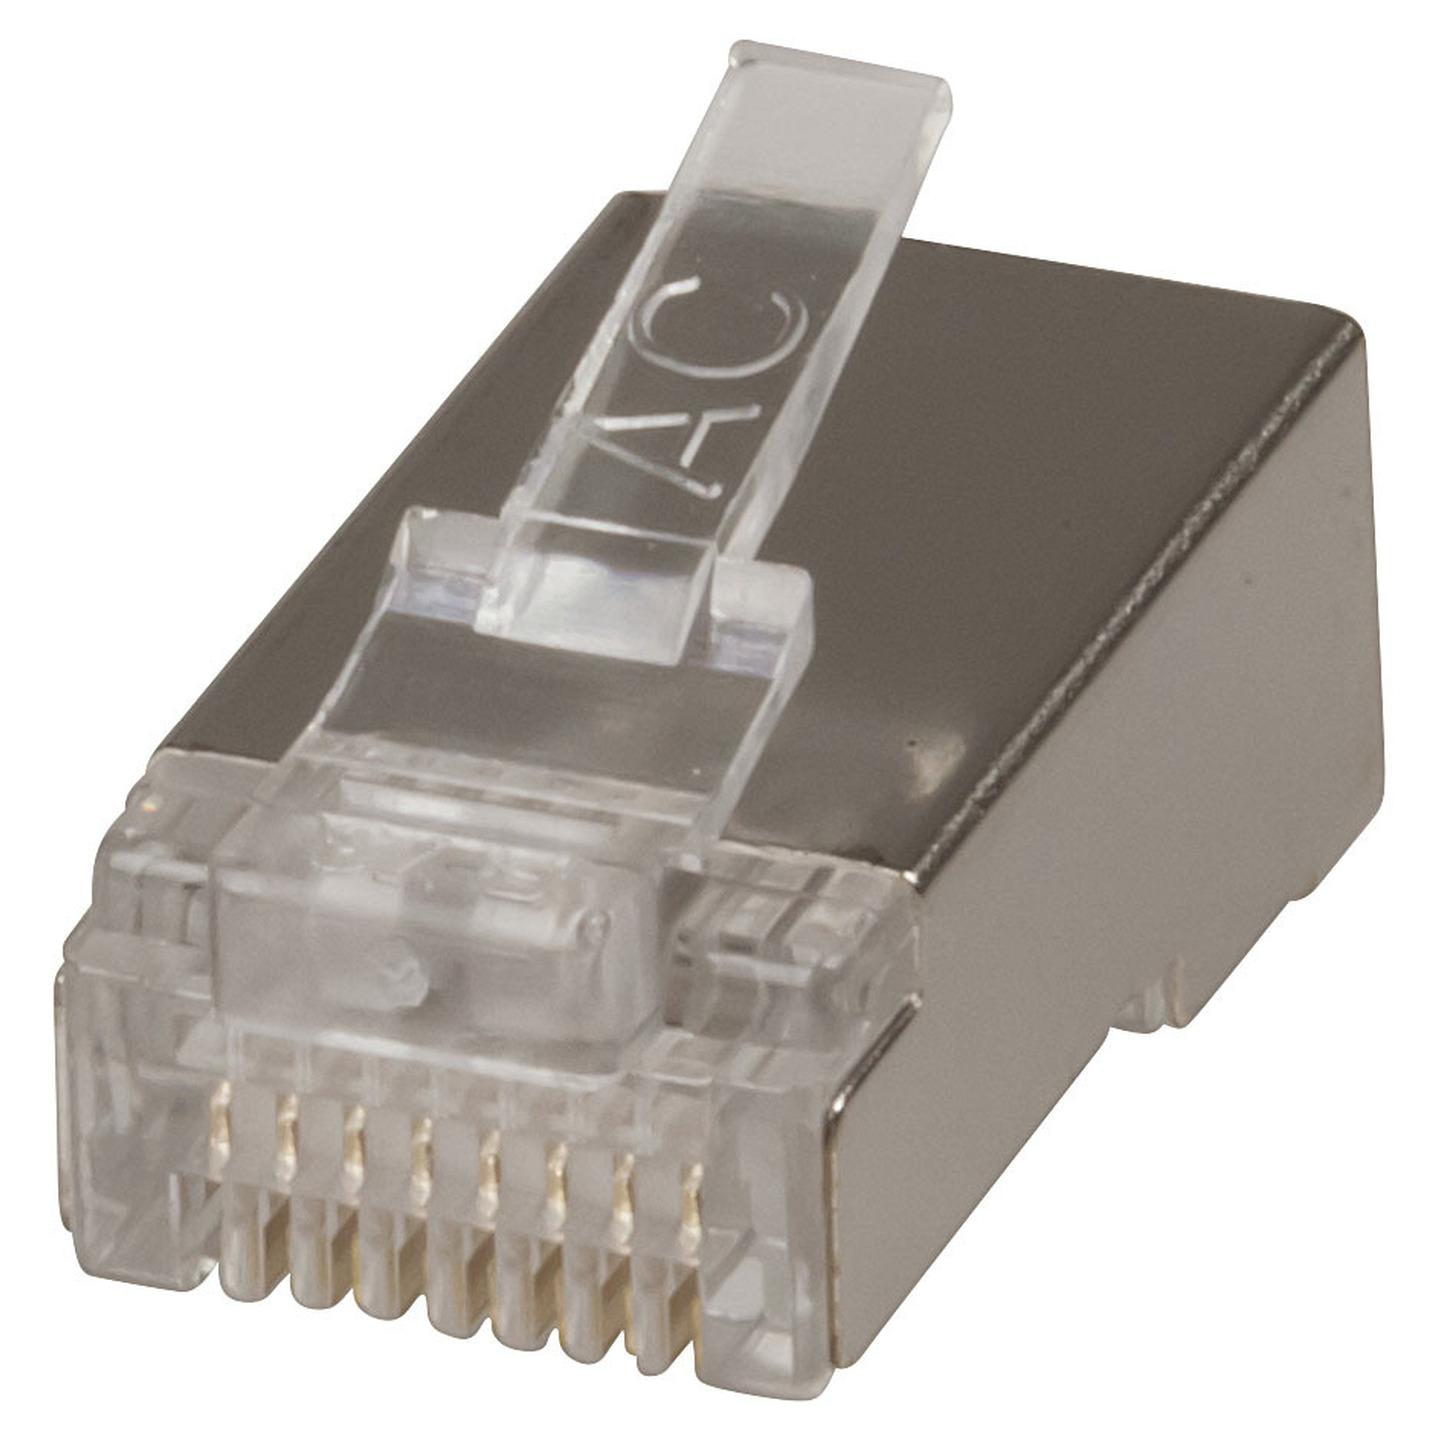 8P/8C Screened RJ45 Plug to Suit Stranded cable - 10 Pack